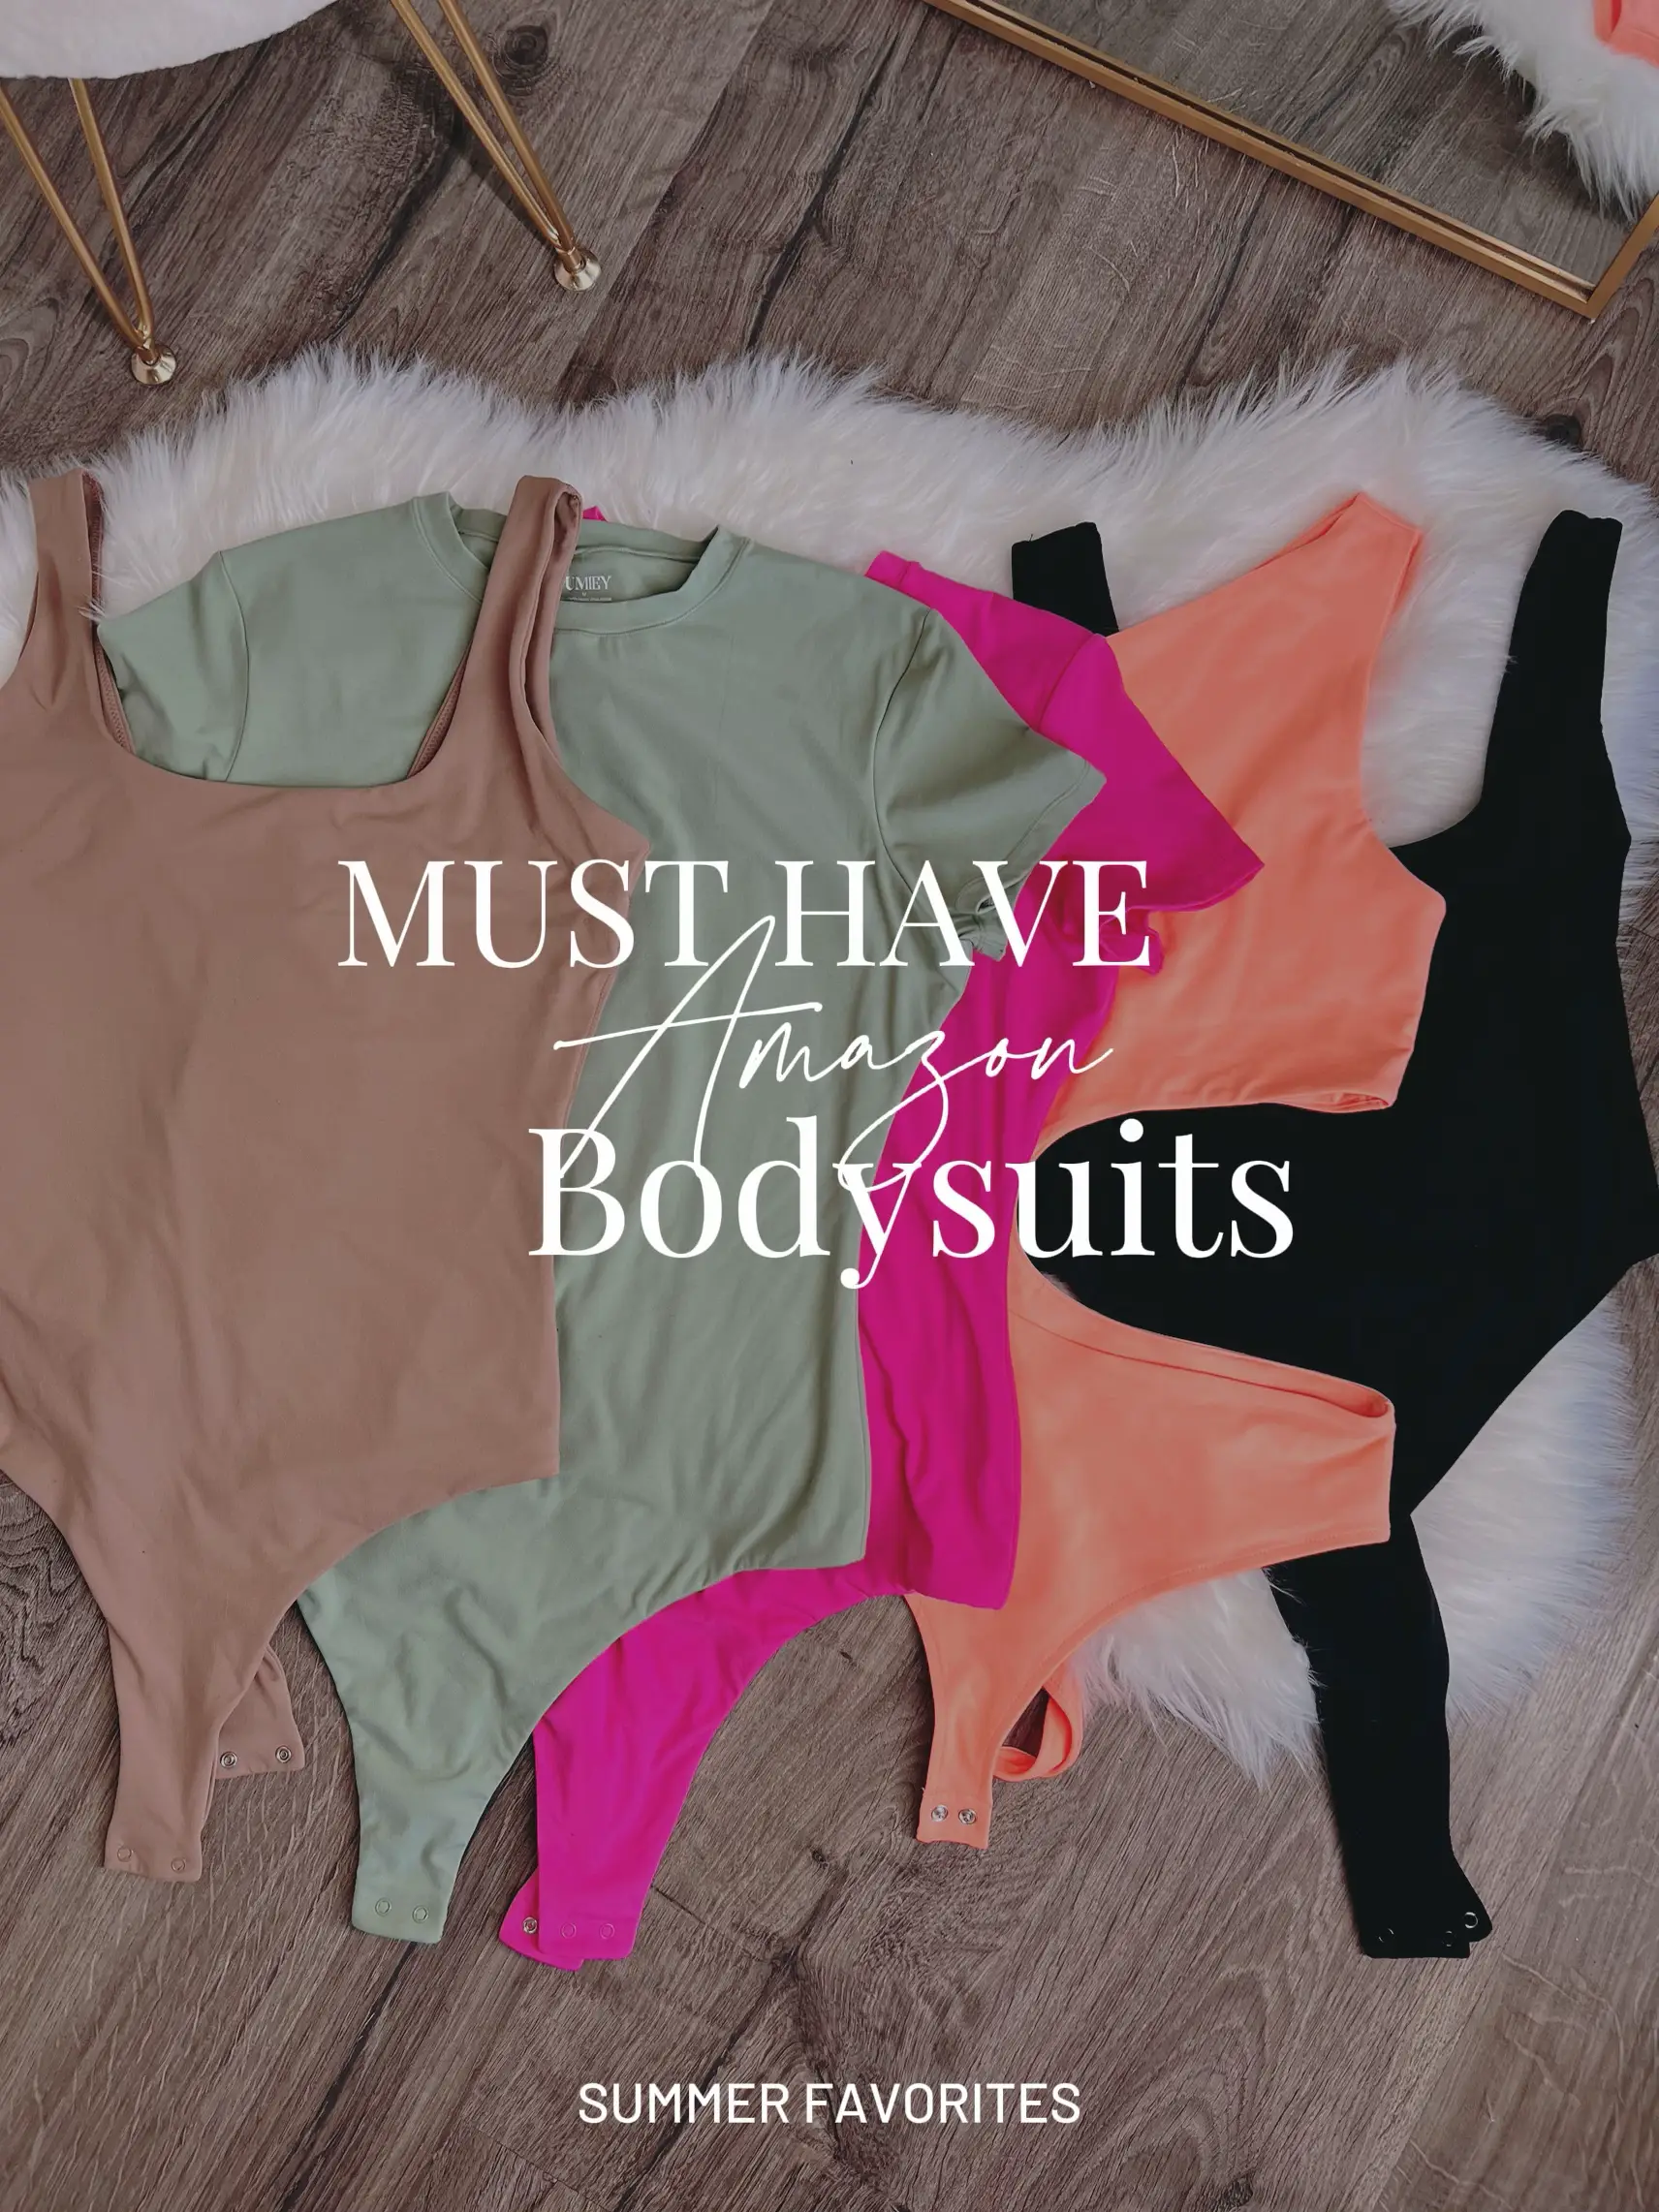 This body shaping garment is so crazy, it's super slimming#bodysuit #b